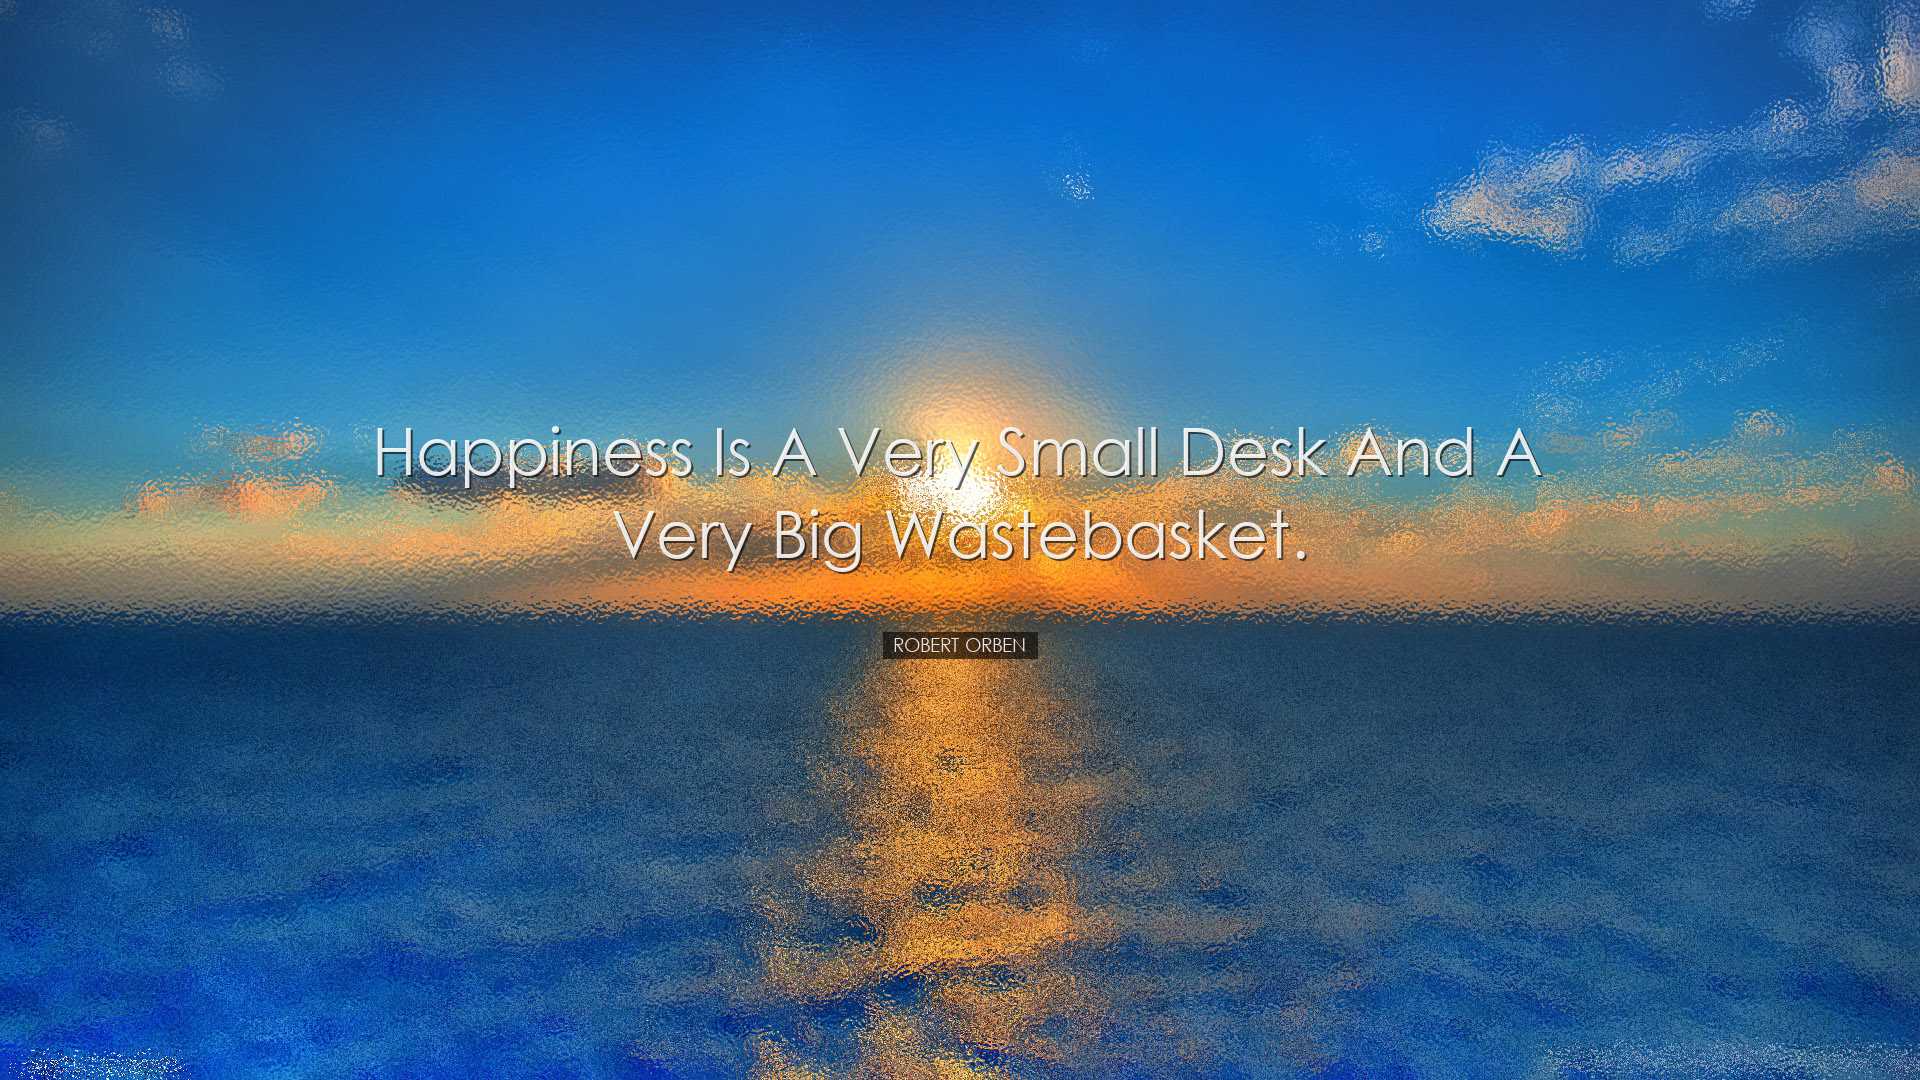 Happiness is a very small desk and a very big wastebasket. - Rober